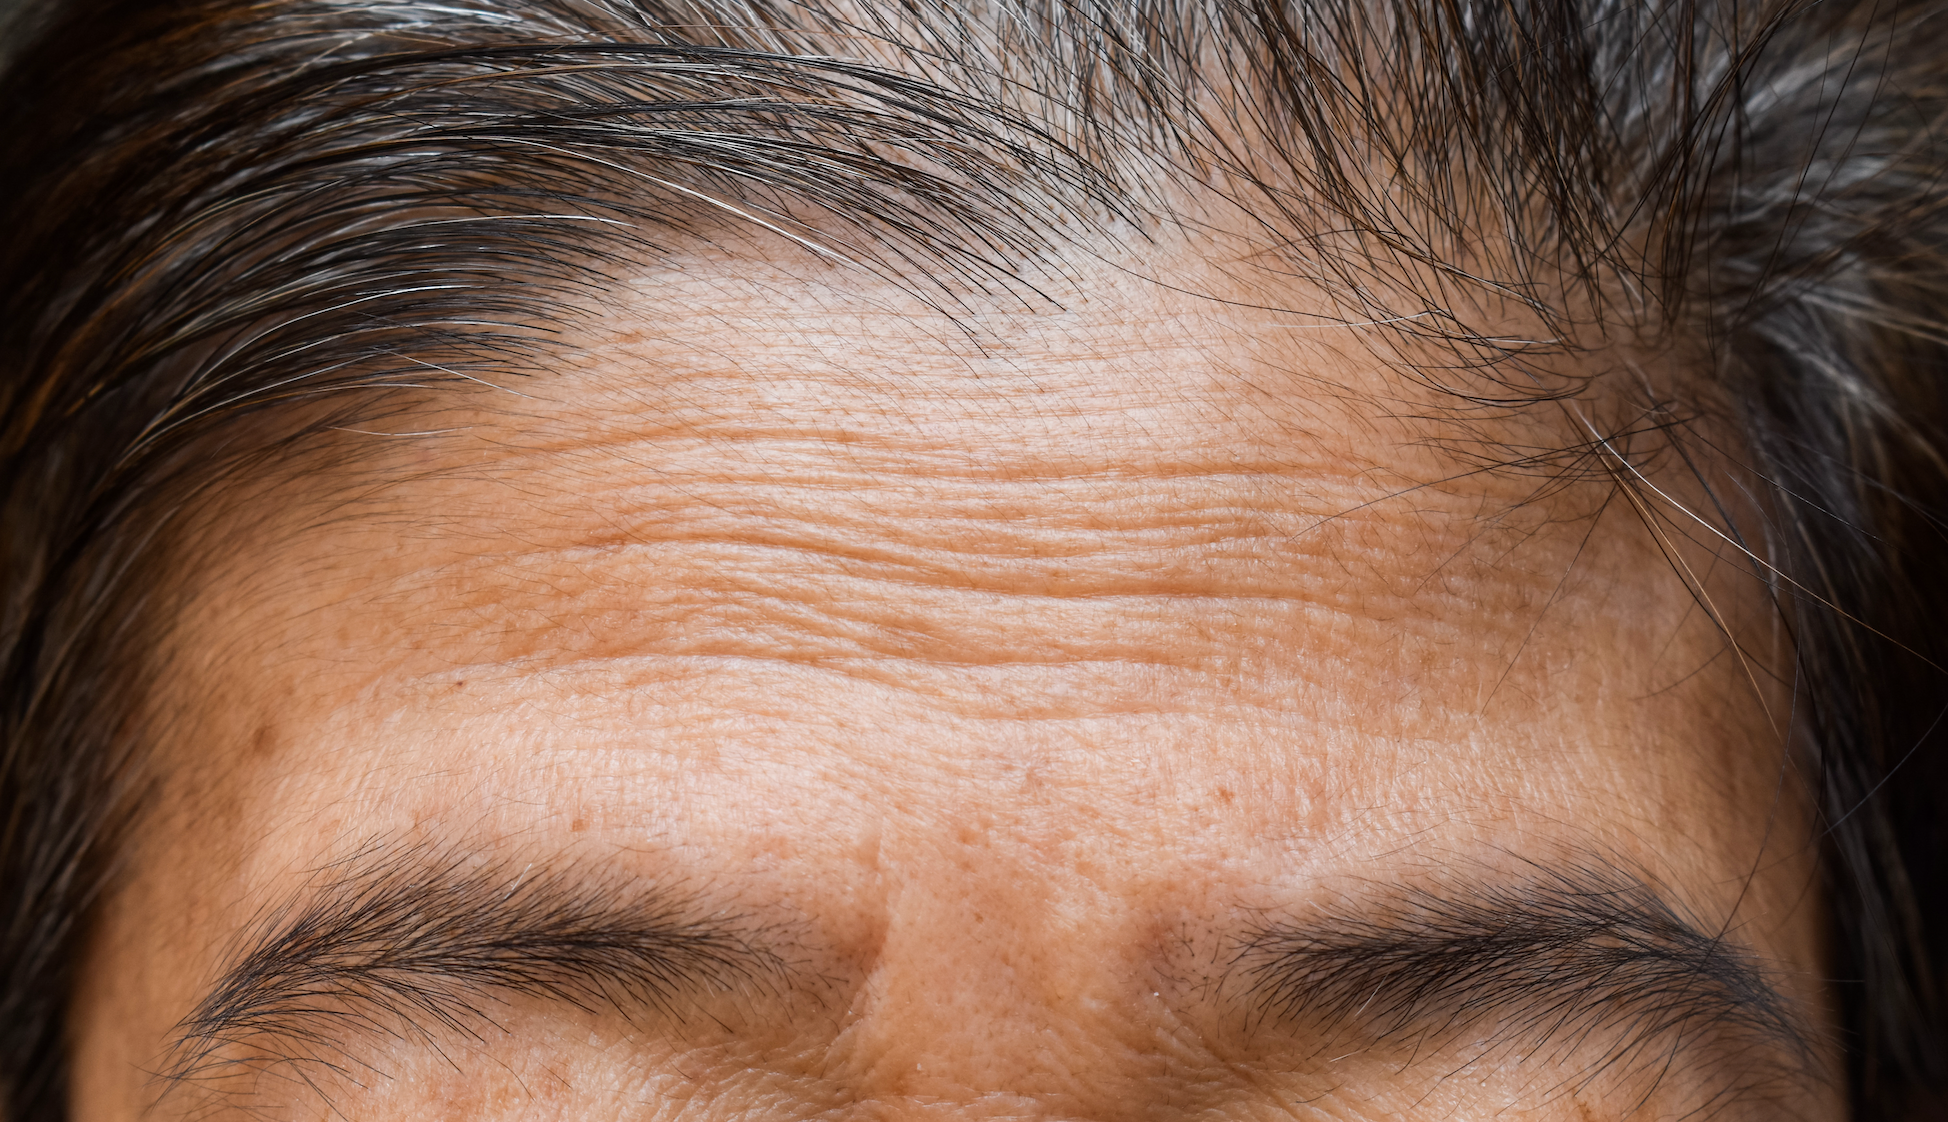 What Are the Most Common Signs of Aging?